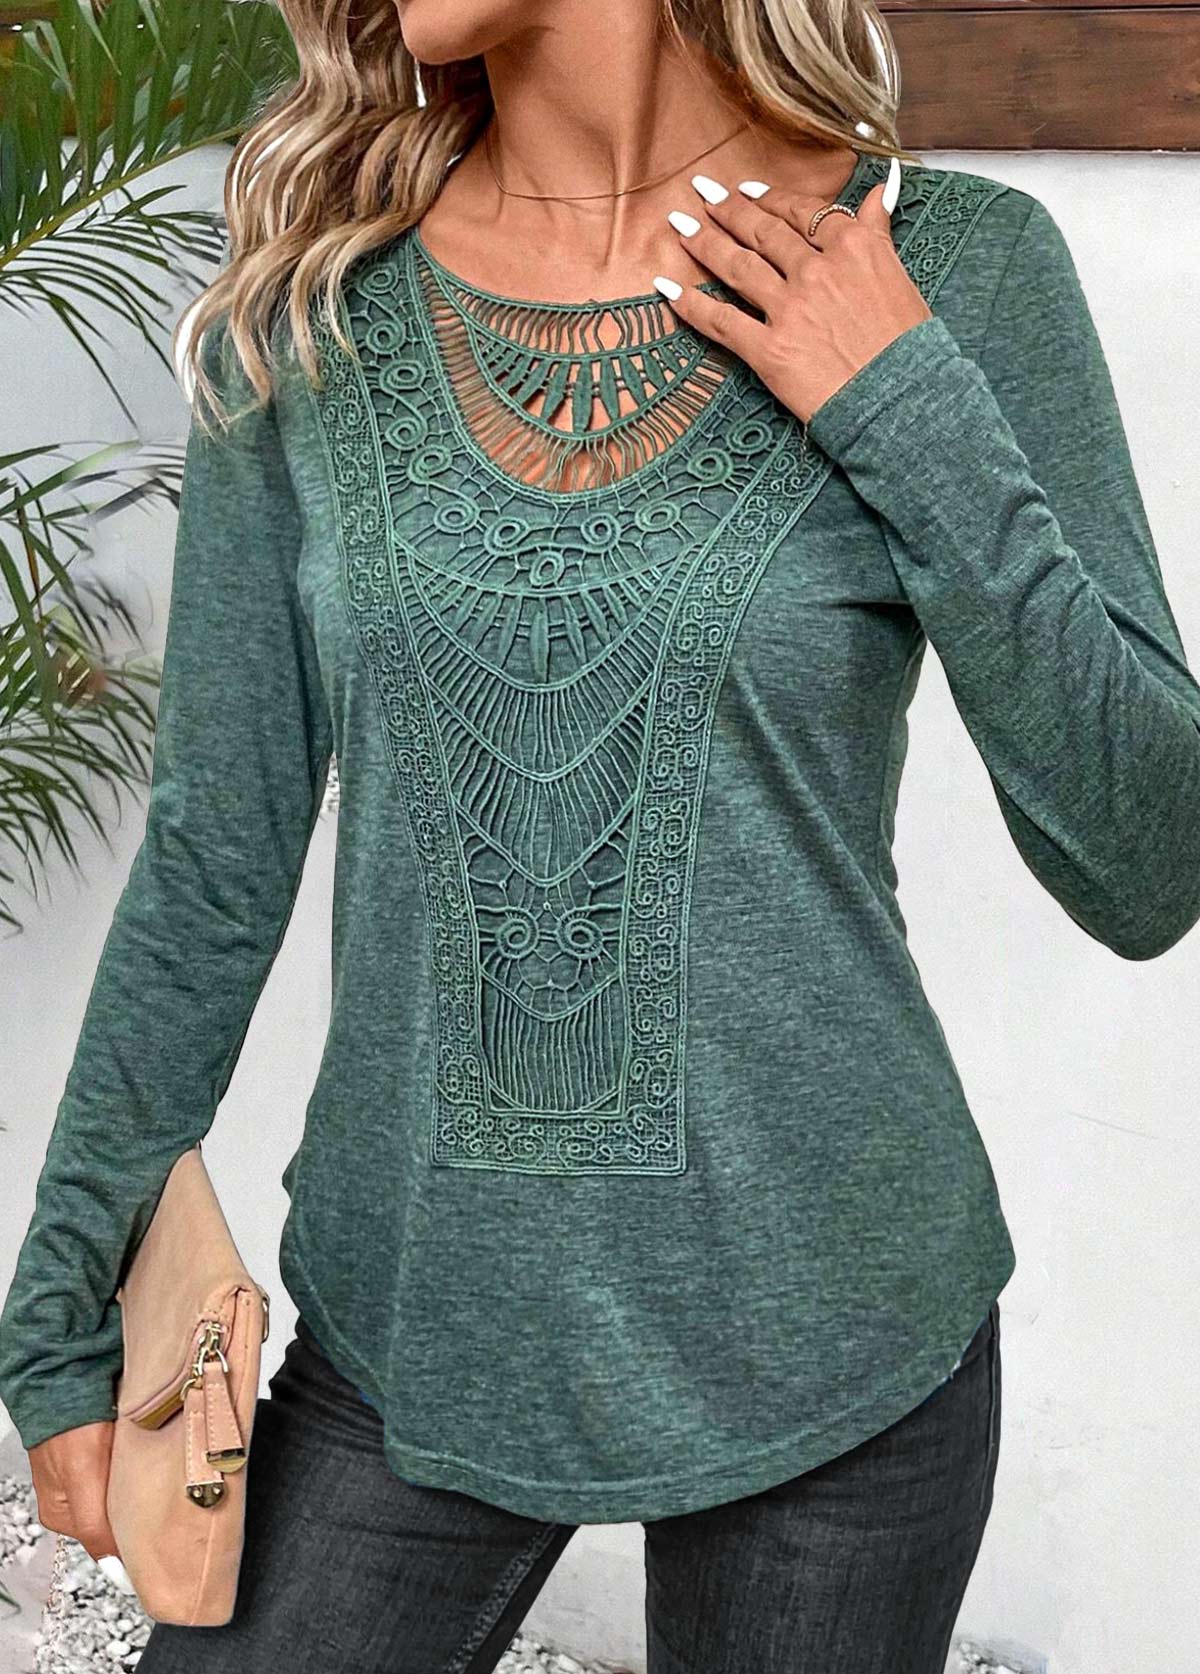 Lace Sage Green Long Sleeve Round Neck T Shirt